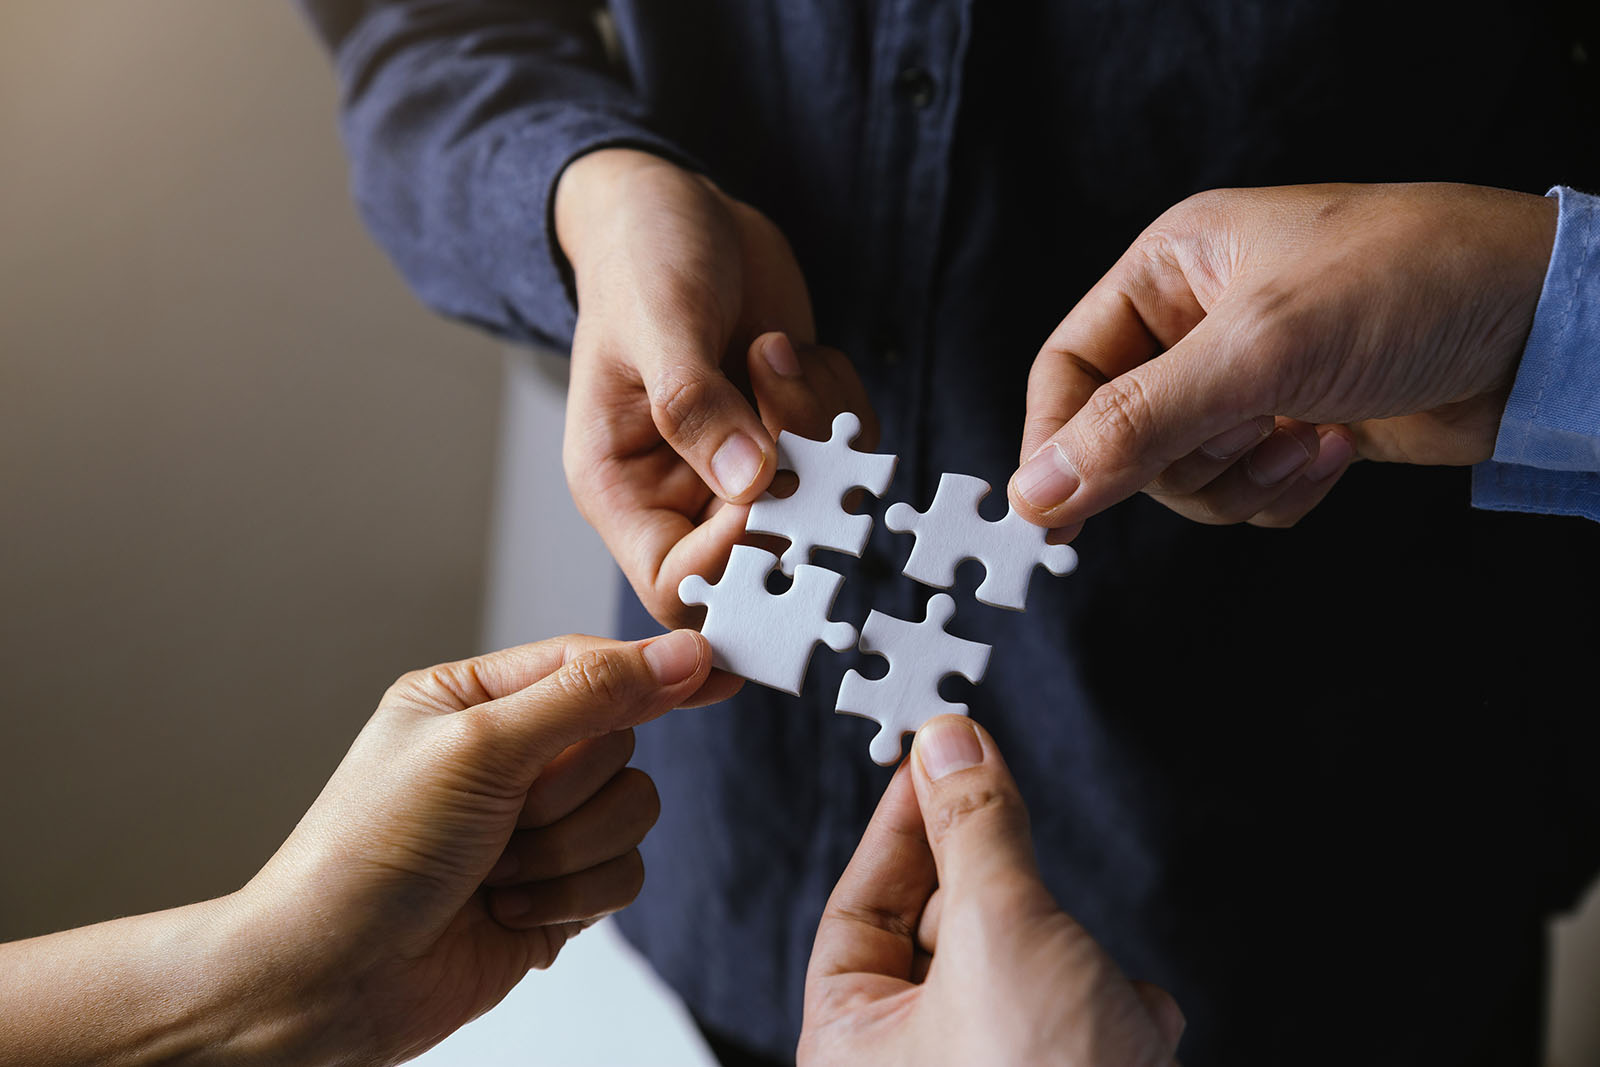 illustration of merger: four jigsaw puzzle pieces, each held by a different person's hand